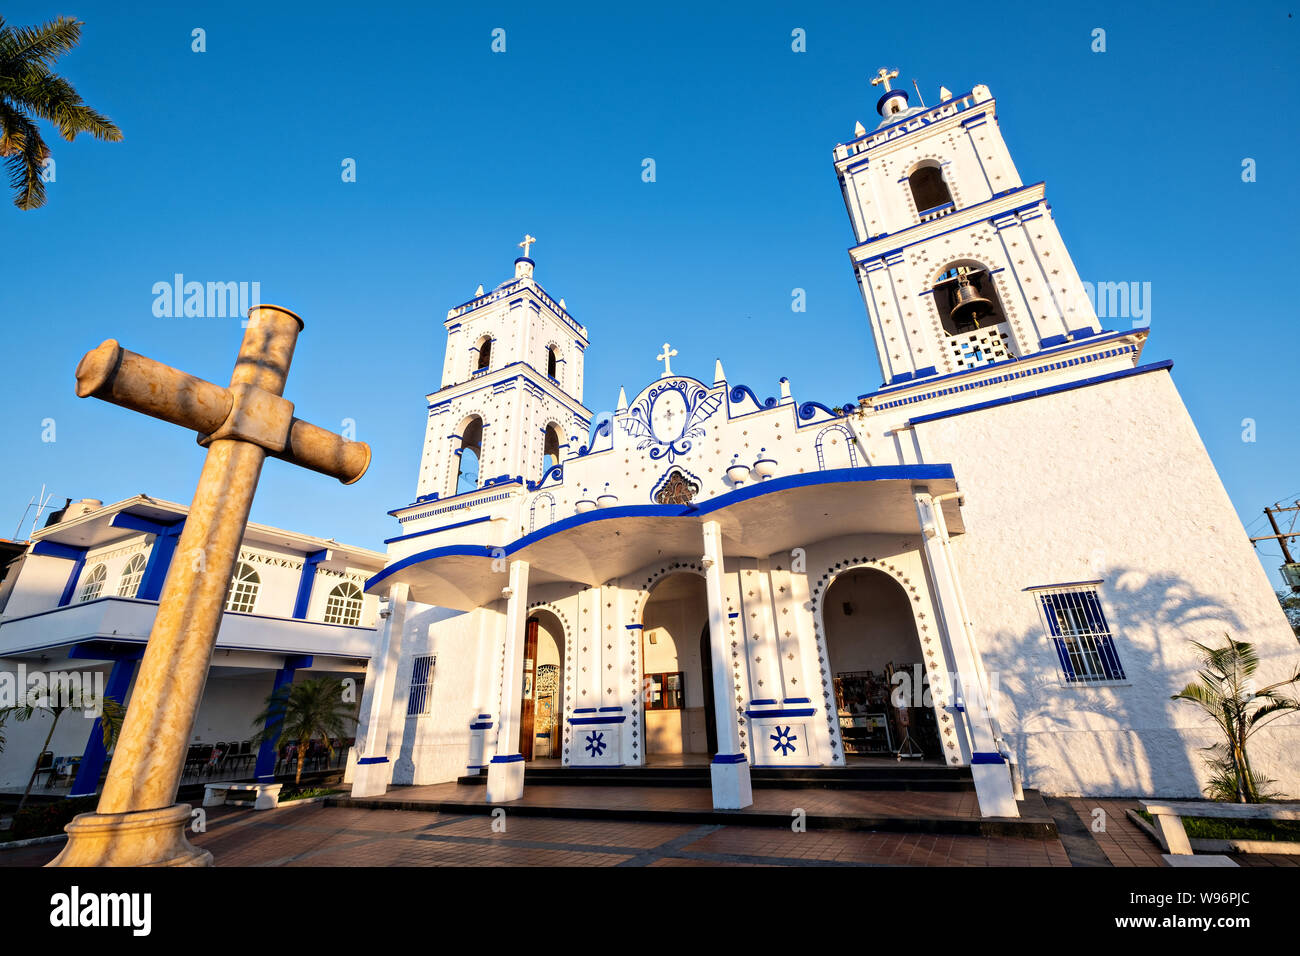 The Basilica of Our Lady of Mount Carmel Catholic Church in Catemaco, Veracruz, Mexico. The town is built along a tropical freshwater lake at the center of the Sierra de Los Tuxtlas mountains, is a popular tourist destination and known for free ranging monkeys, the rainforest backdrop and Mexican witches known as Brujos. Stock Photo